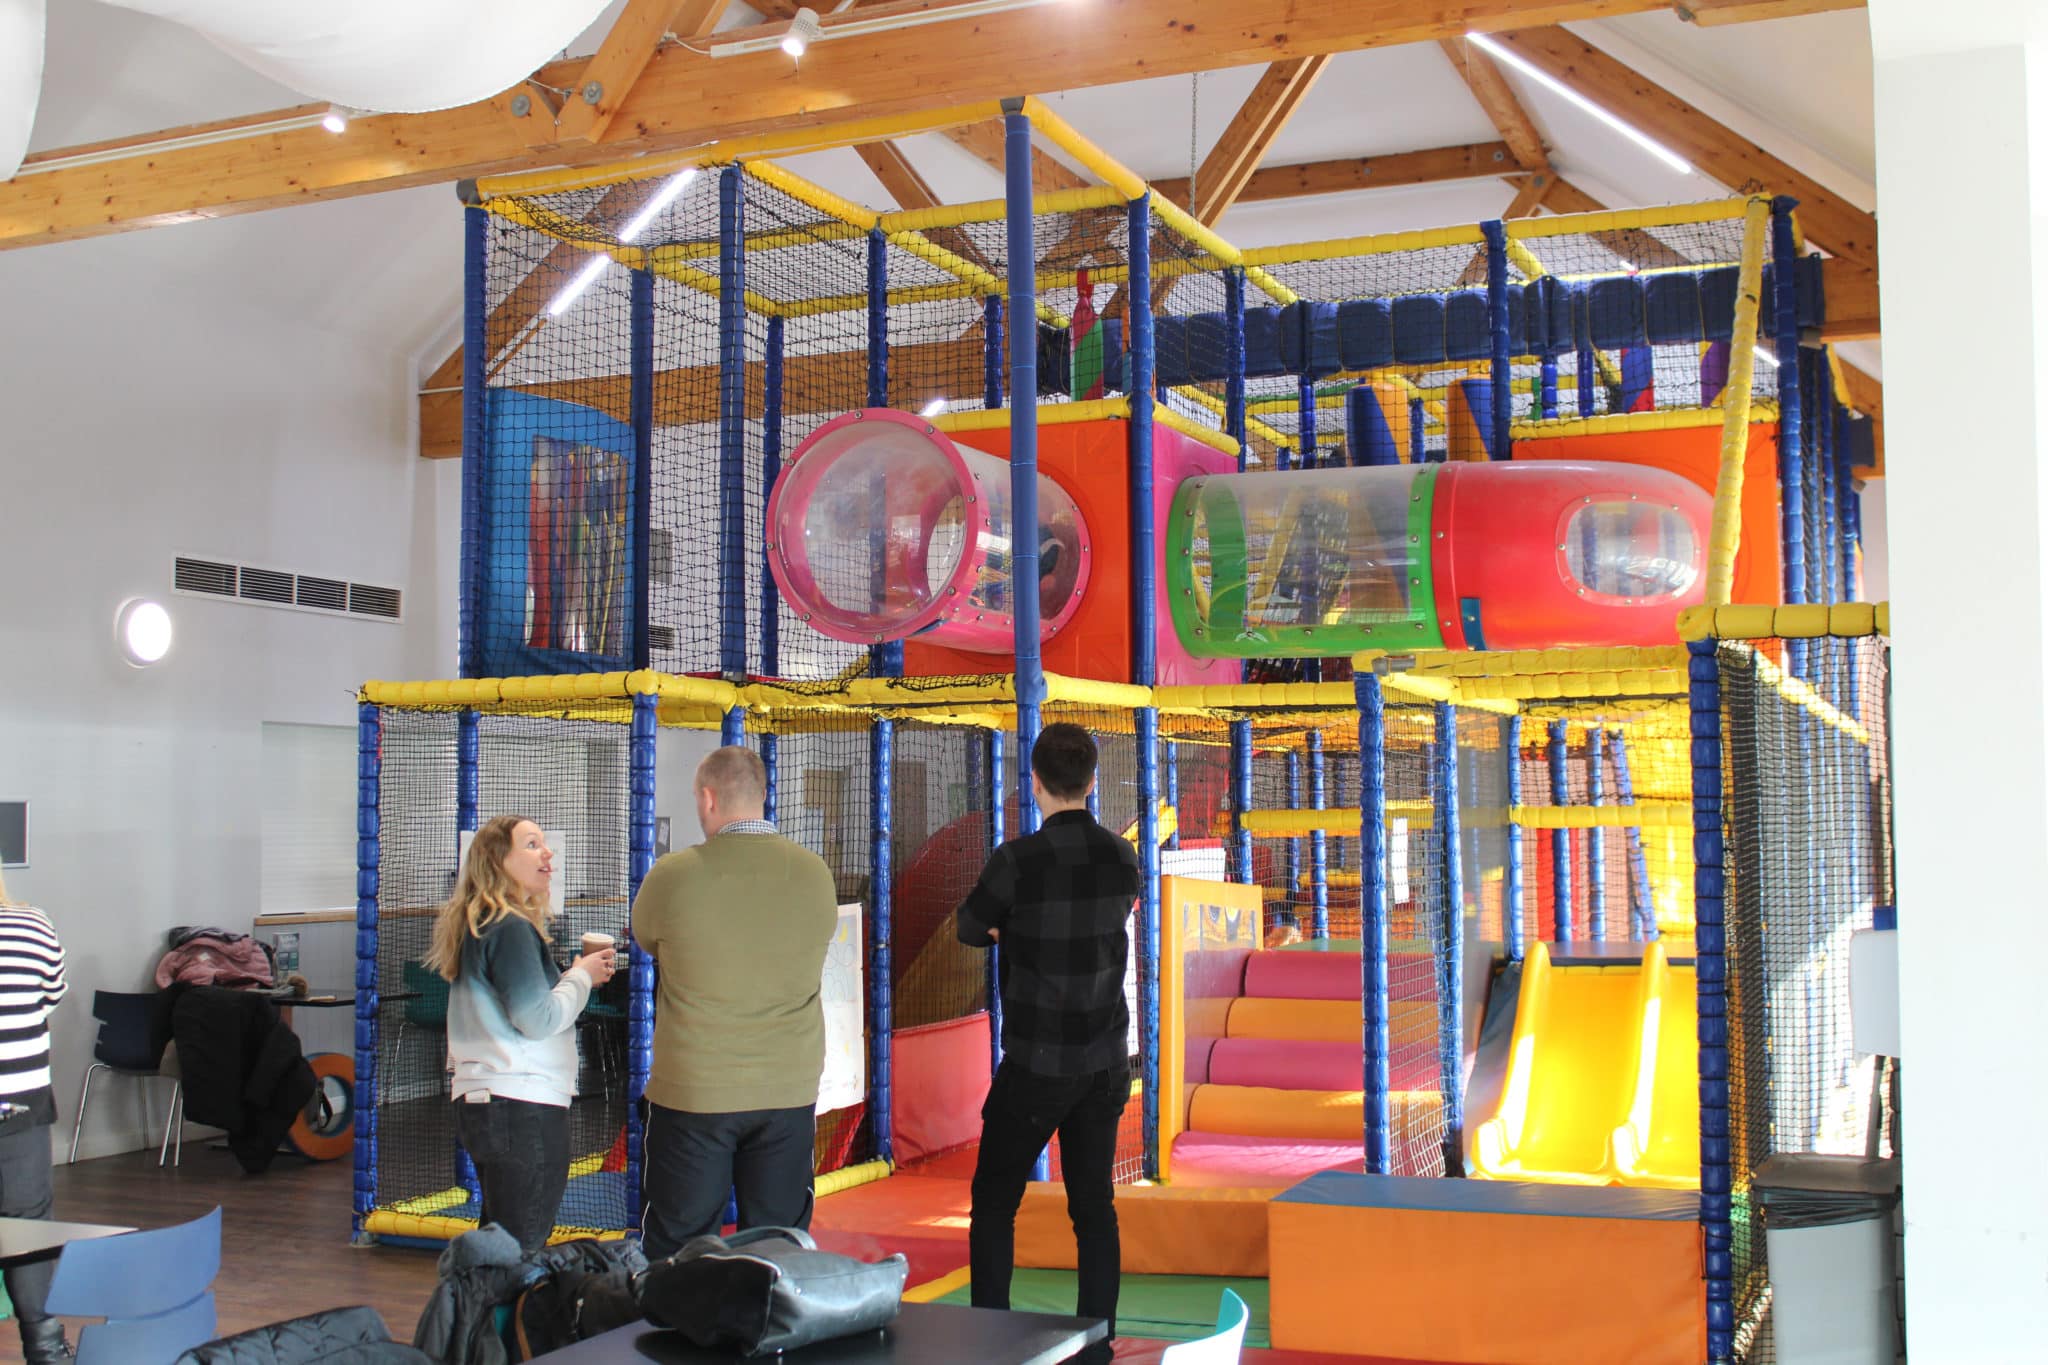 Bewl water soft play area